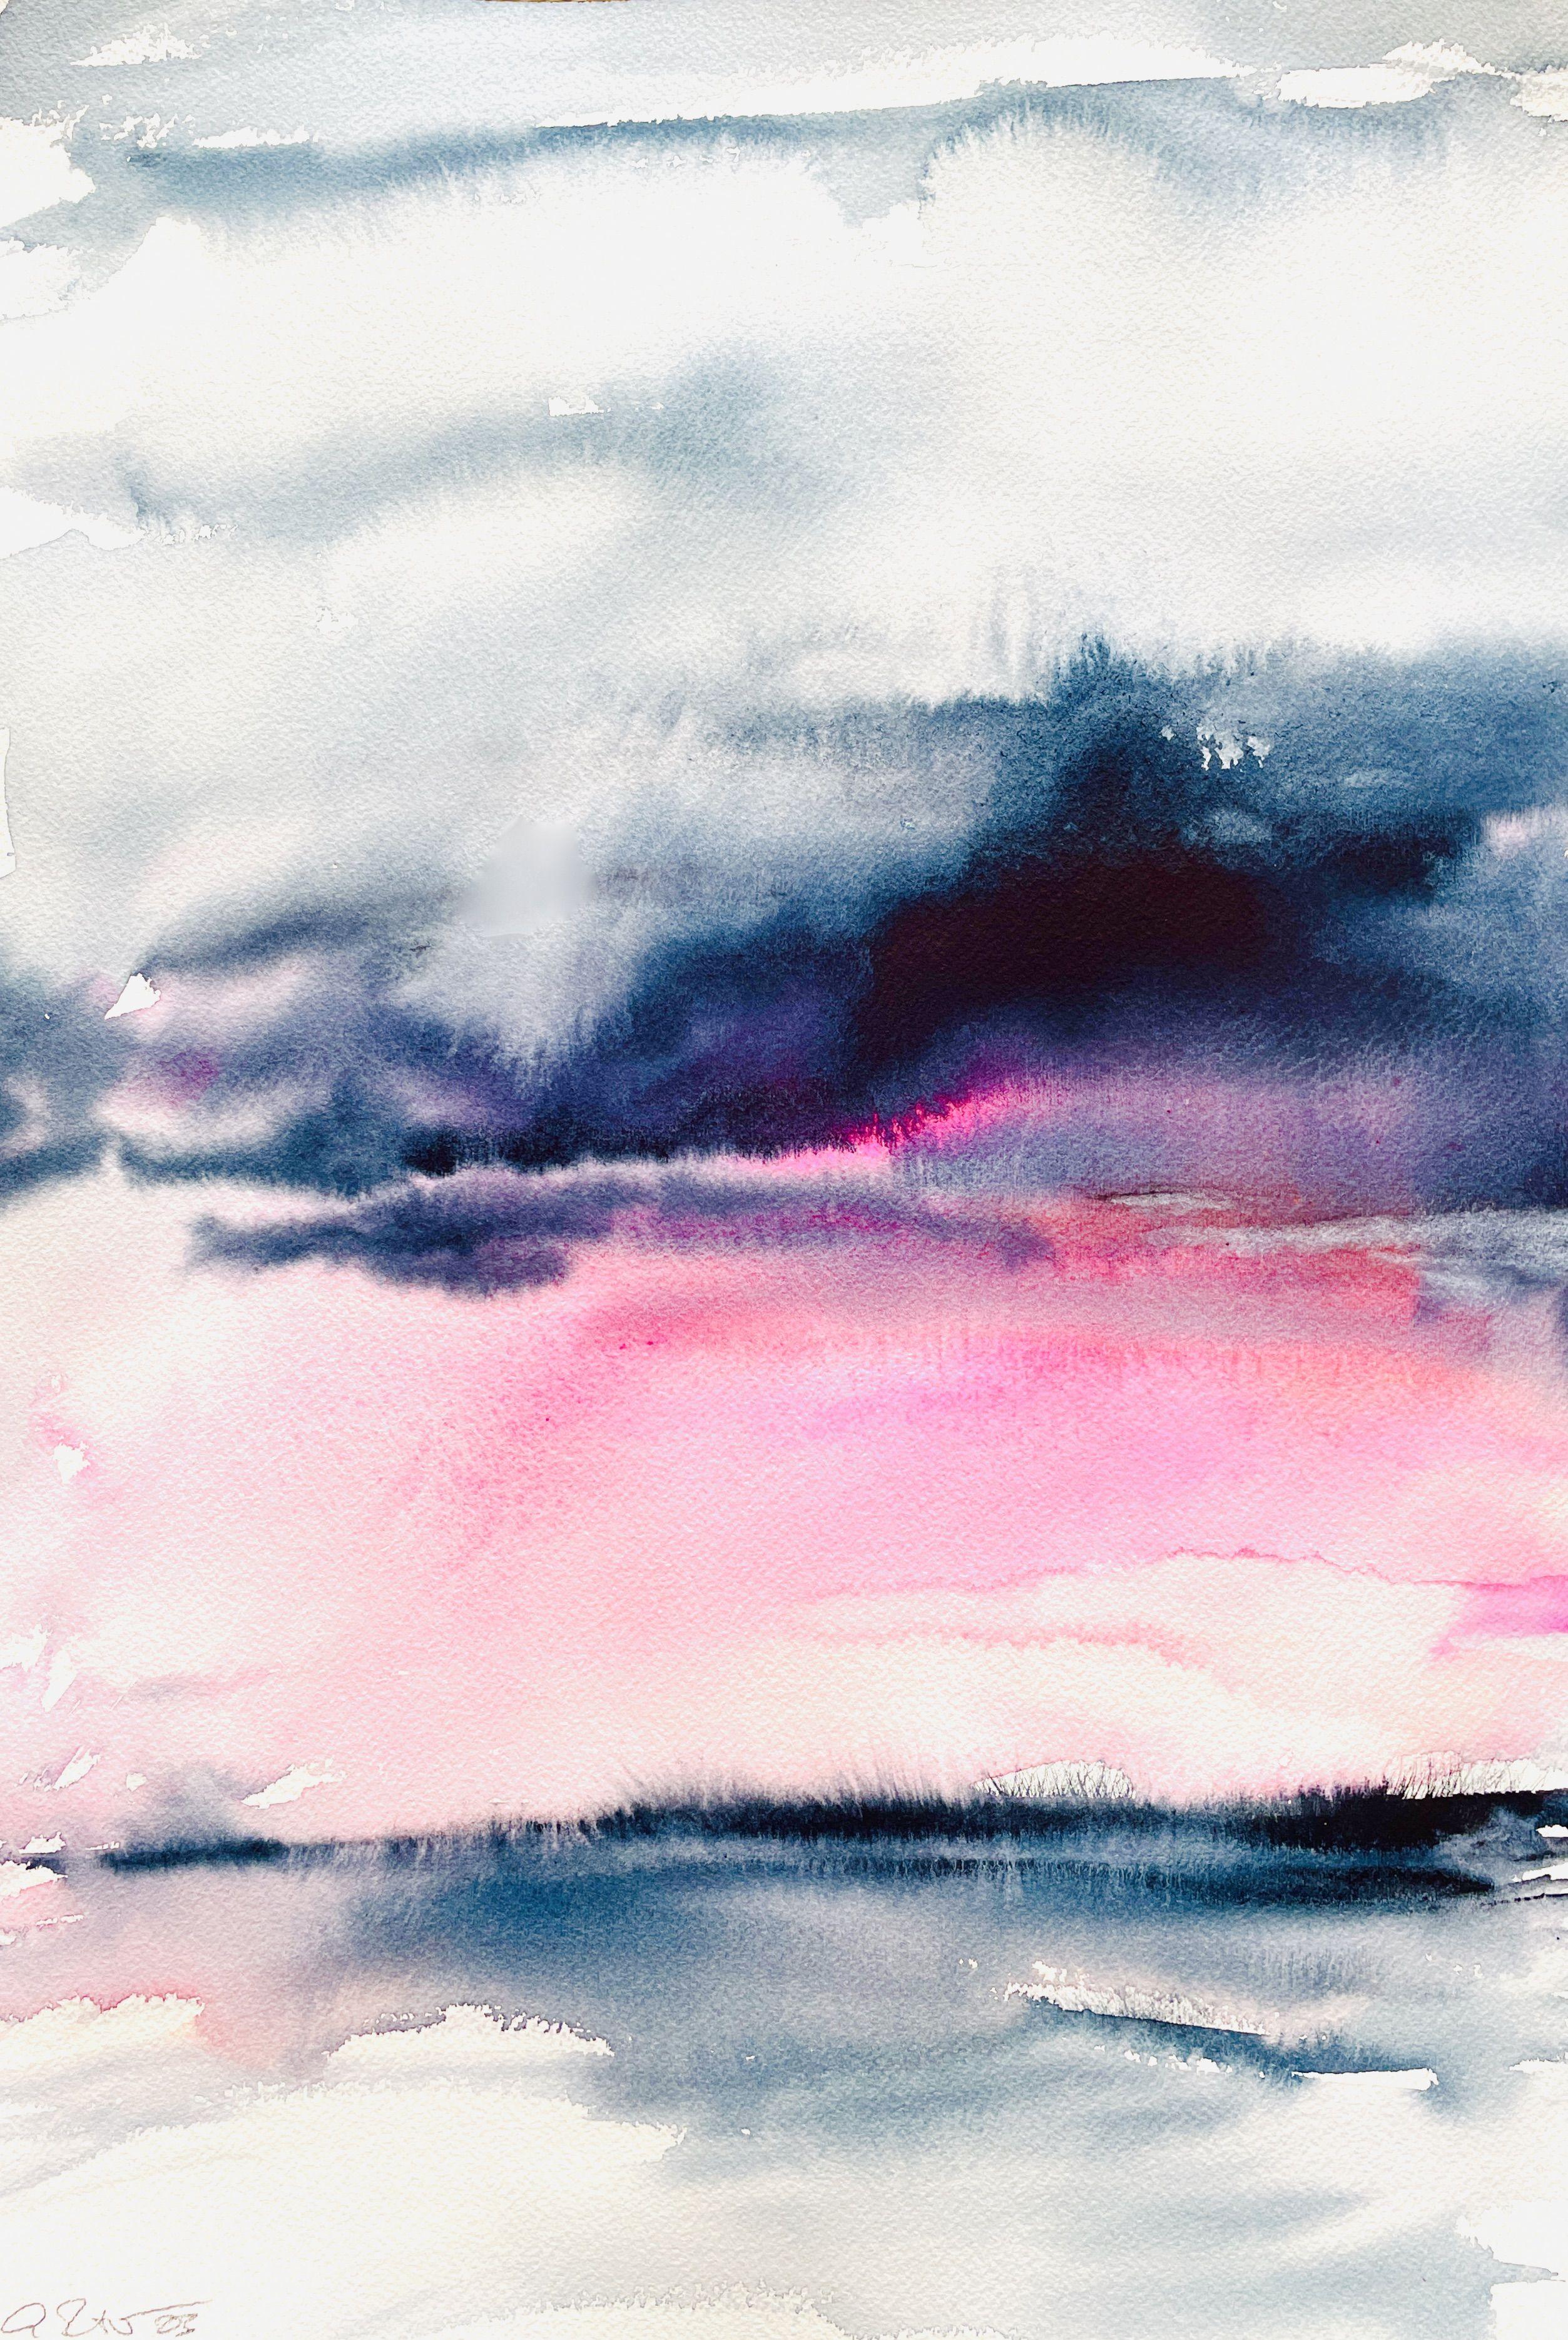 Meet Me In The Land Of Faded Dreams, Painting, Watercolor on Paper - Art by Gesa Reuter